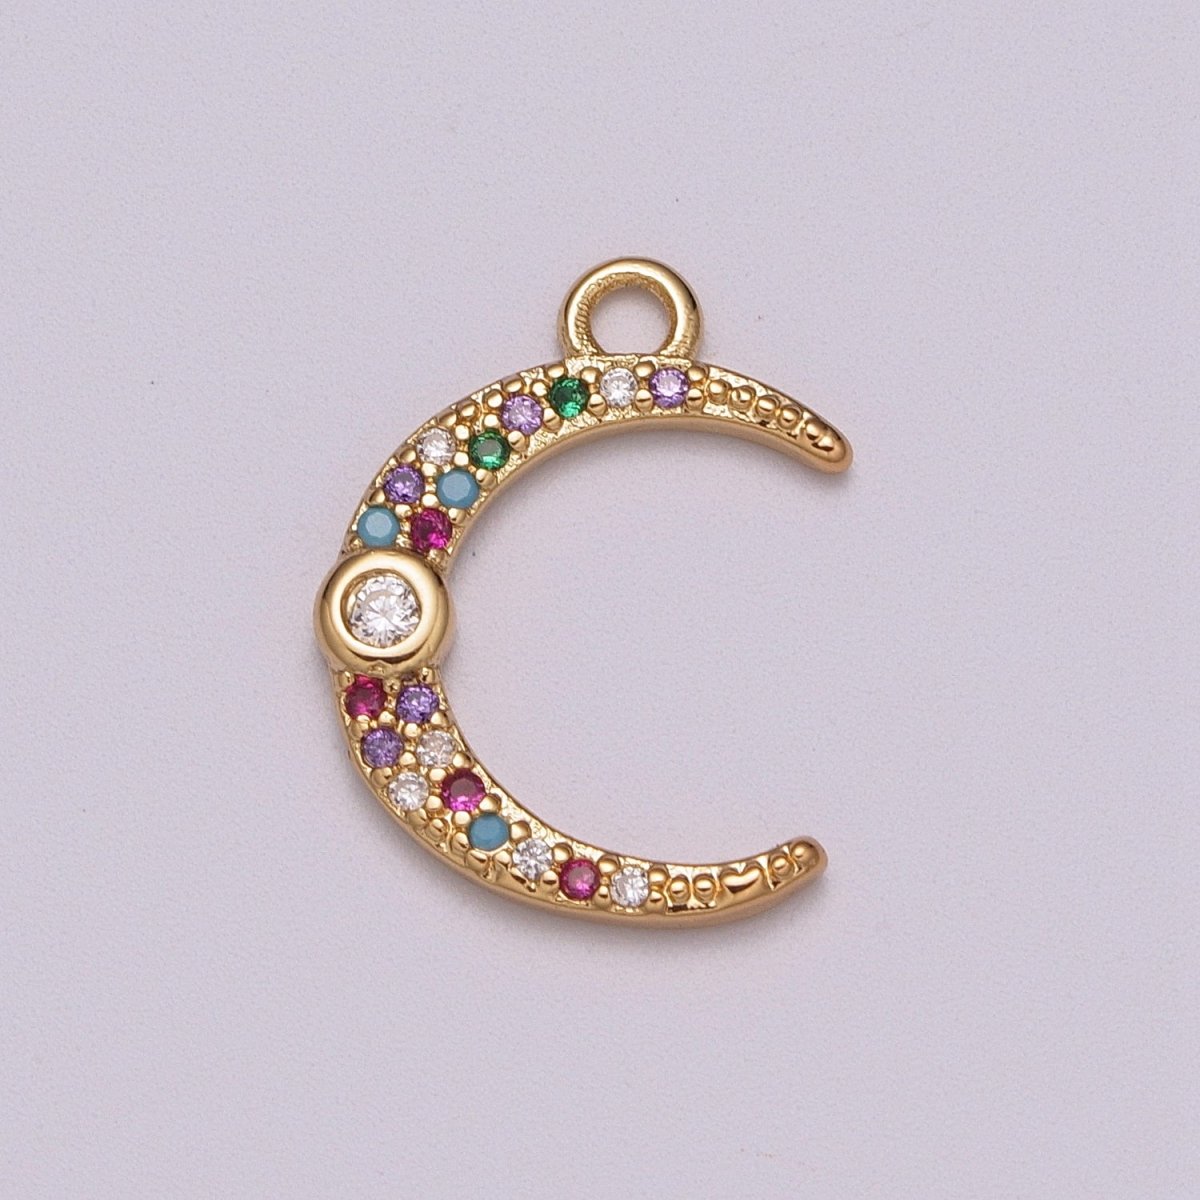 Dainty Crescent Moon Charm Celestial Jewelry Micro Pave Moon Shape Curve Gold Pendant for Necklace Earring Bracelet Supply M-767 - DLUXCA